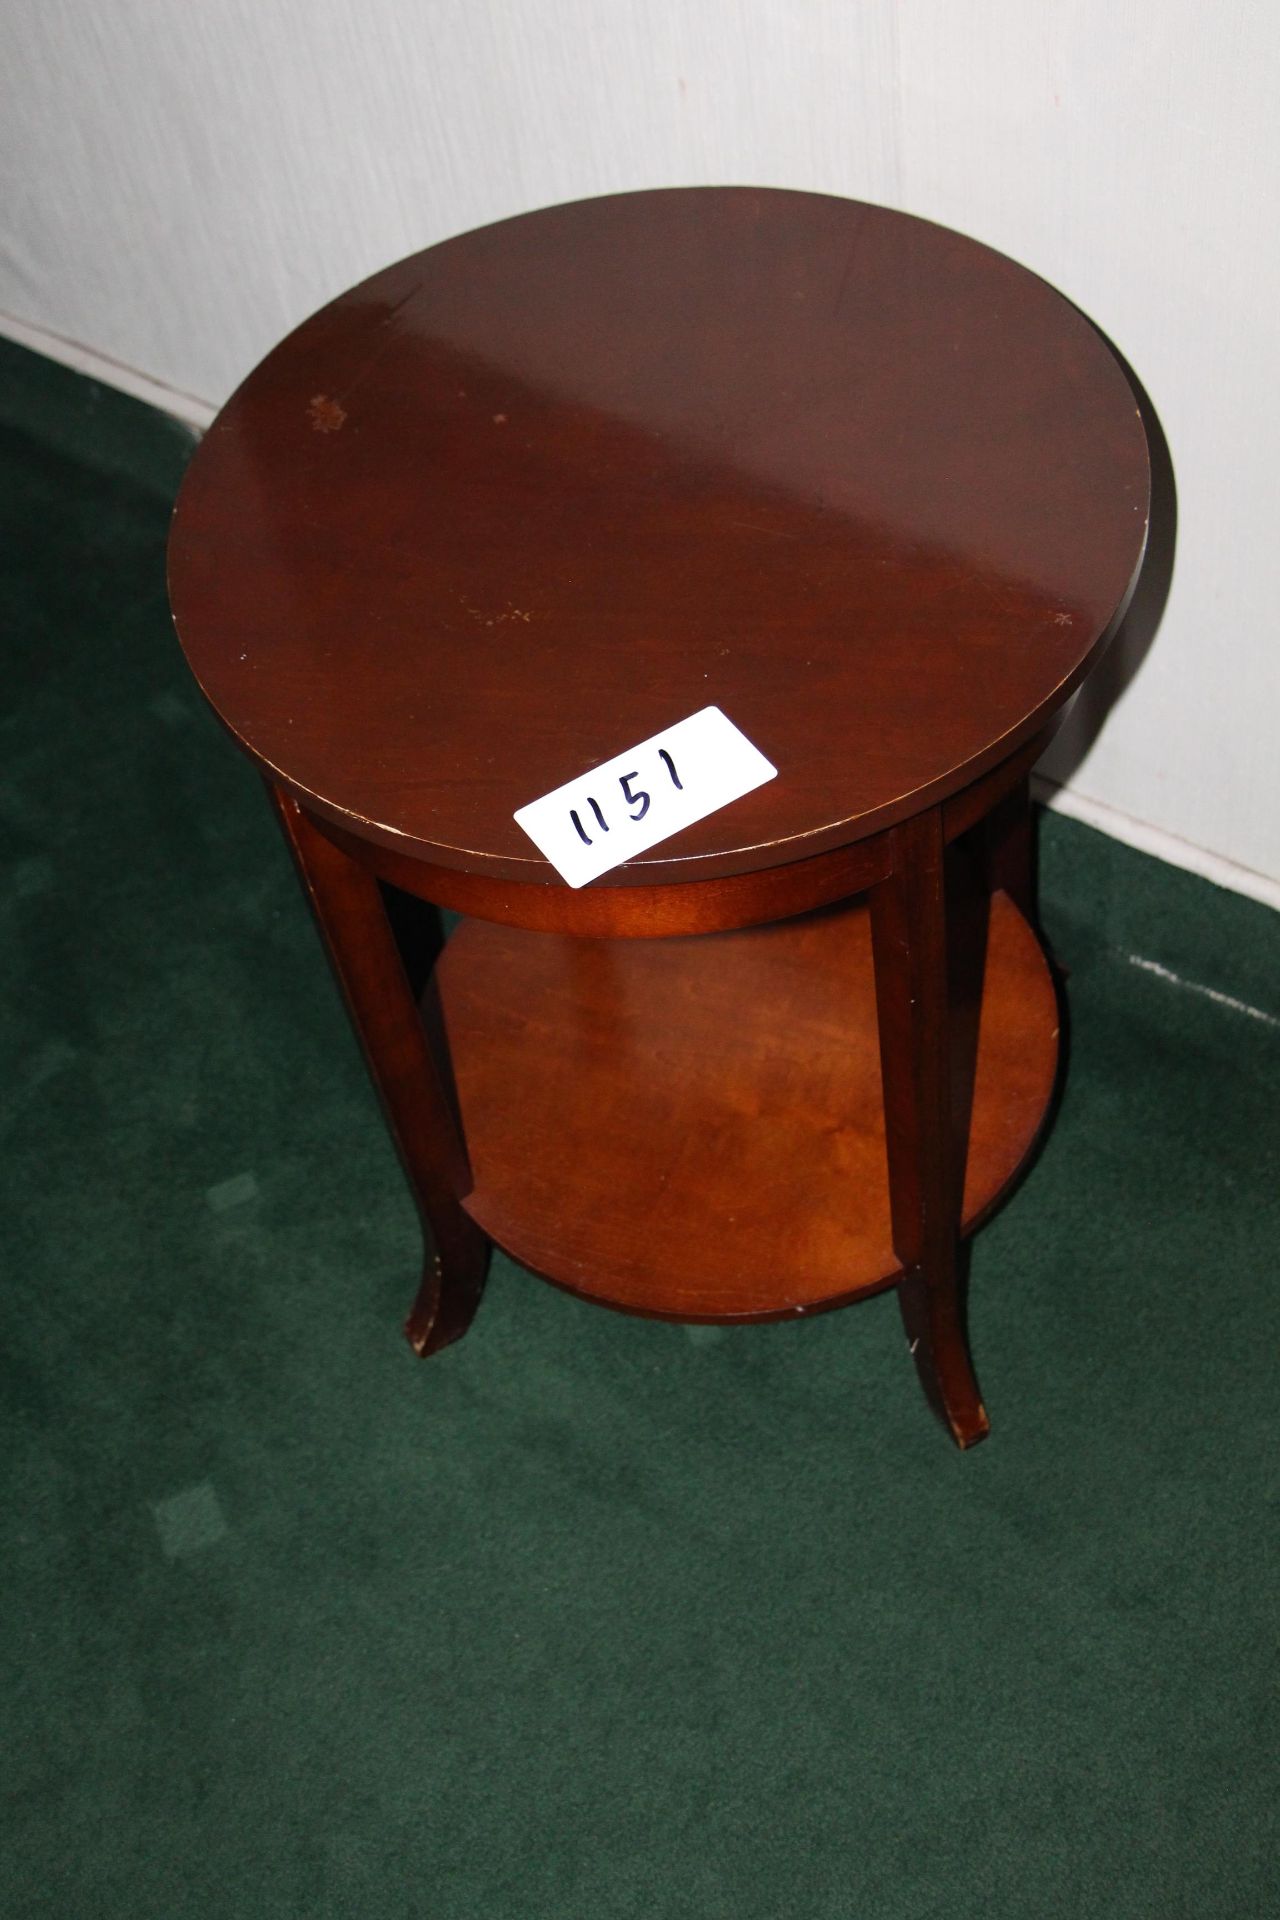 Mahogany color round side table